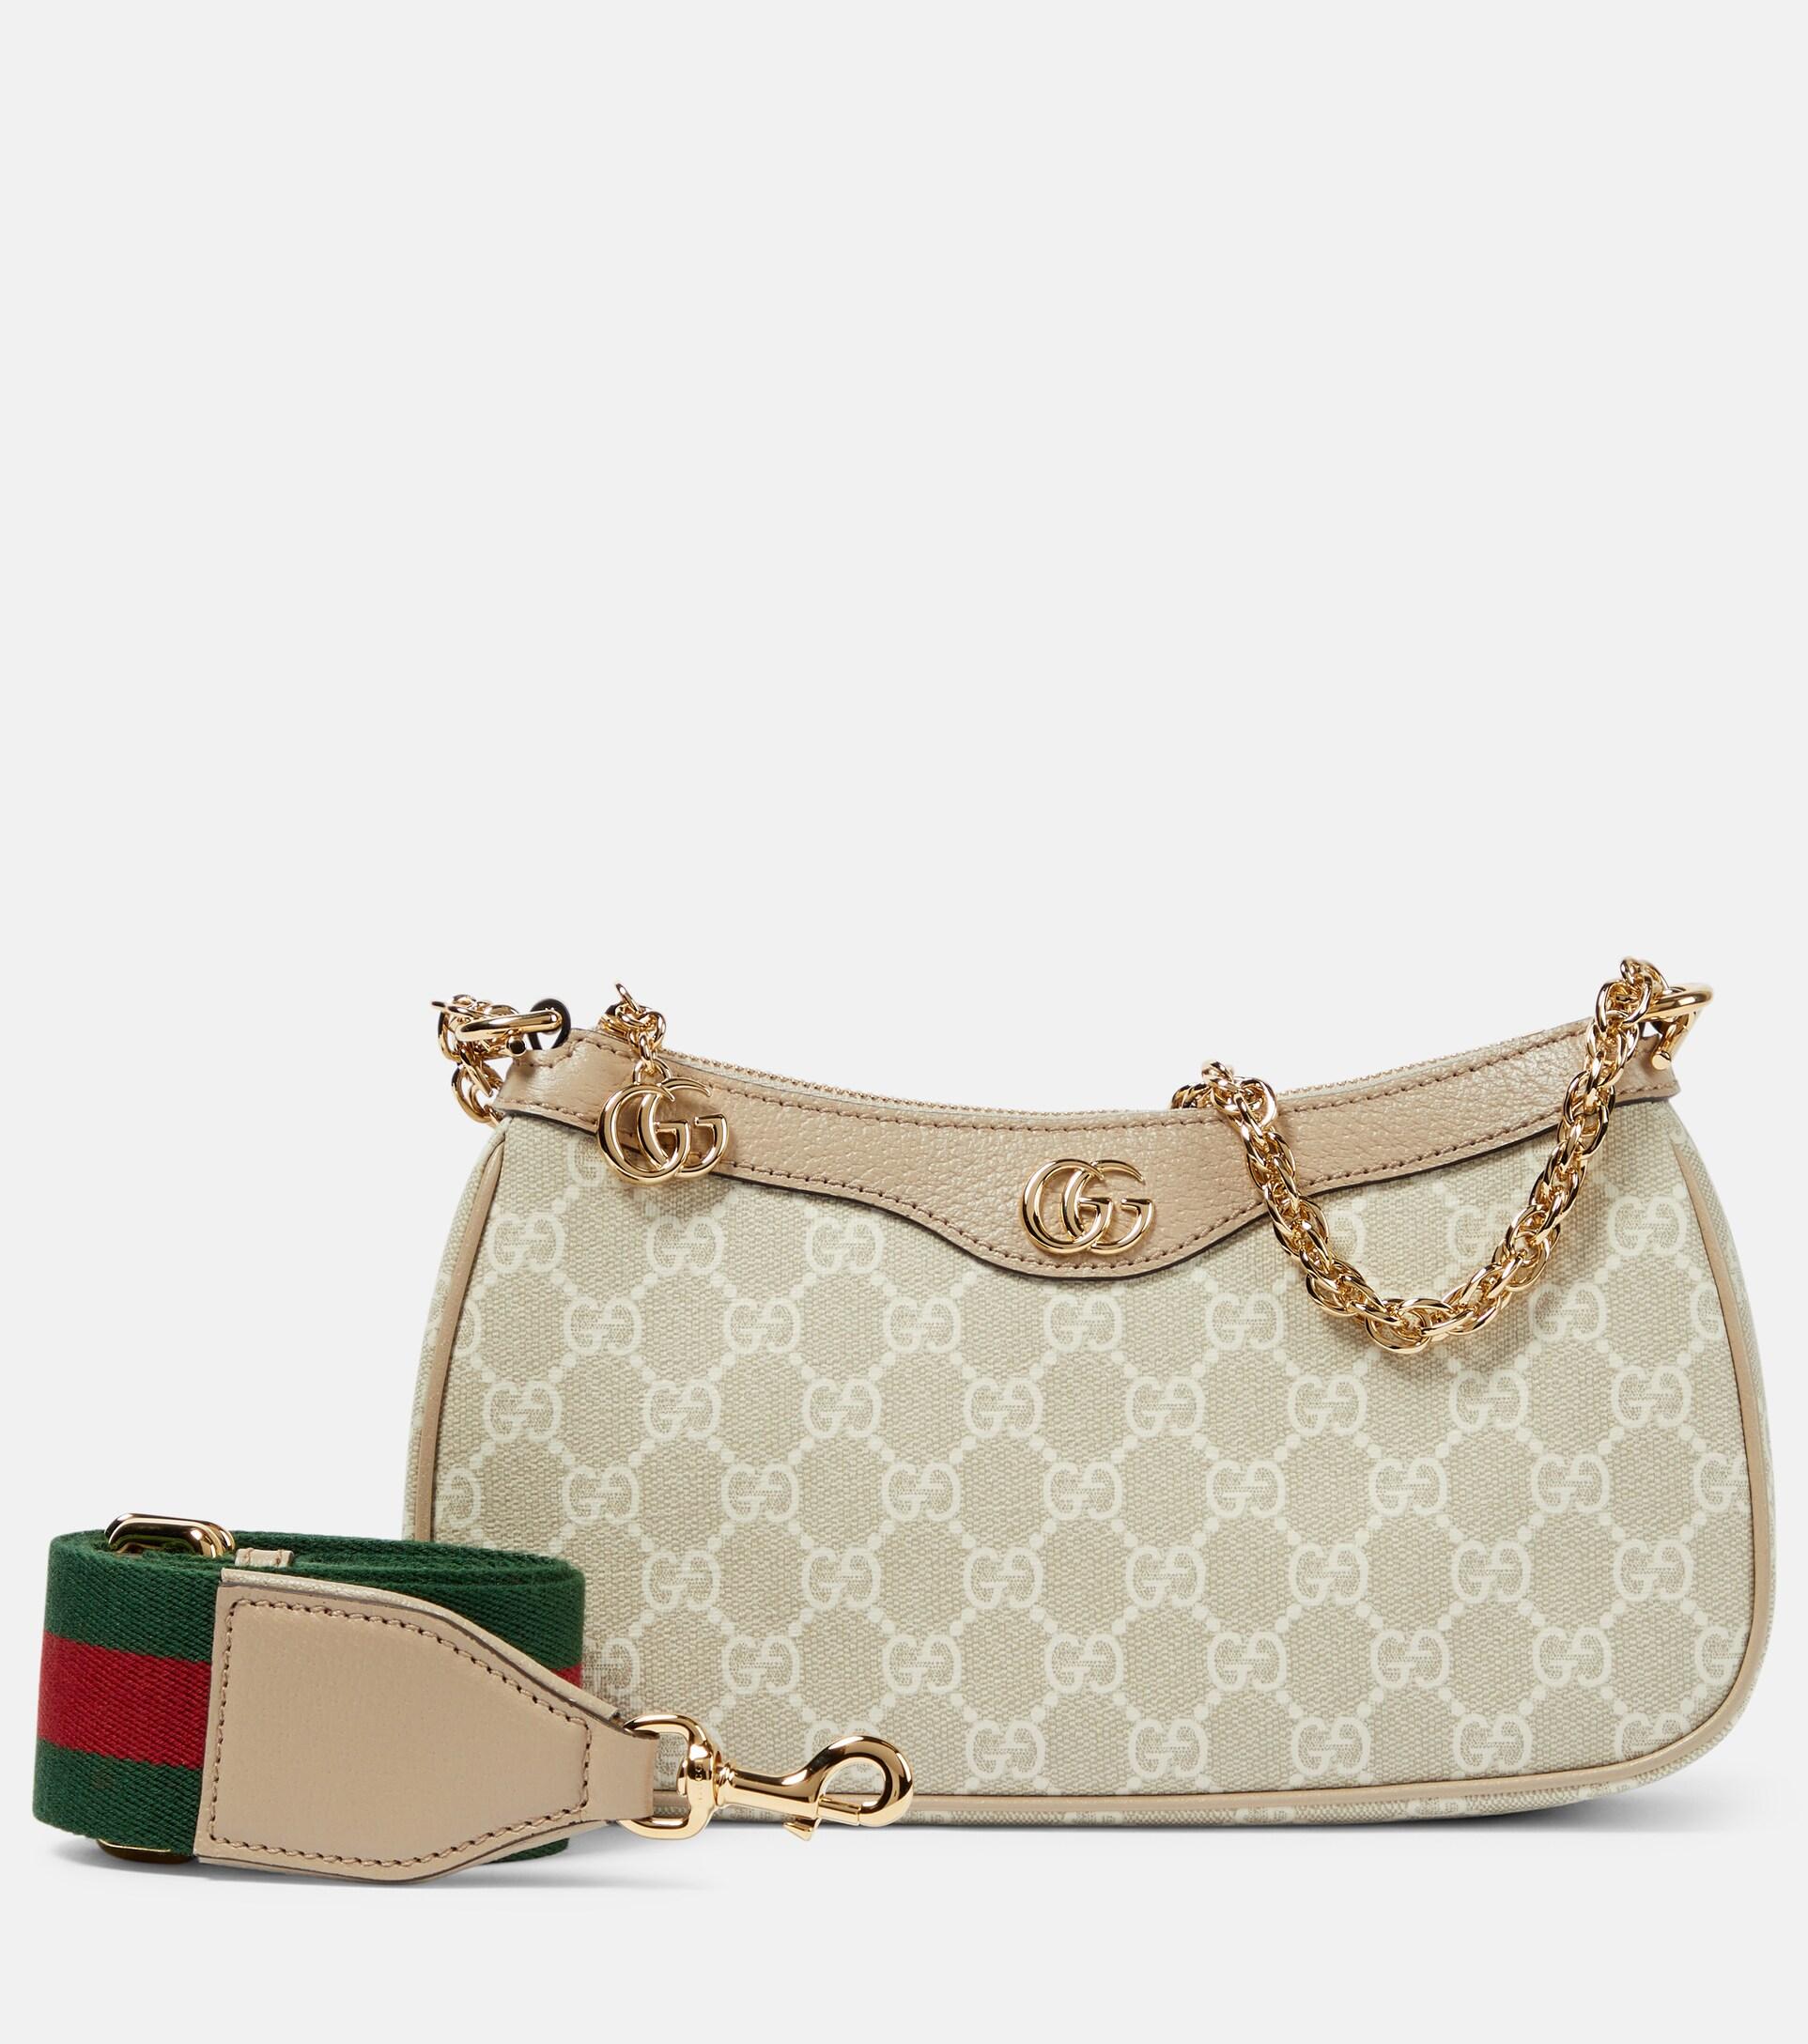 Gucci Ophidia Small GG Canvas Shoulder Bag in Natural